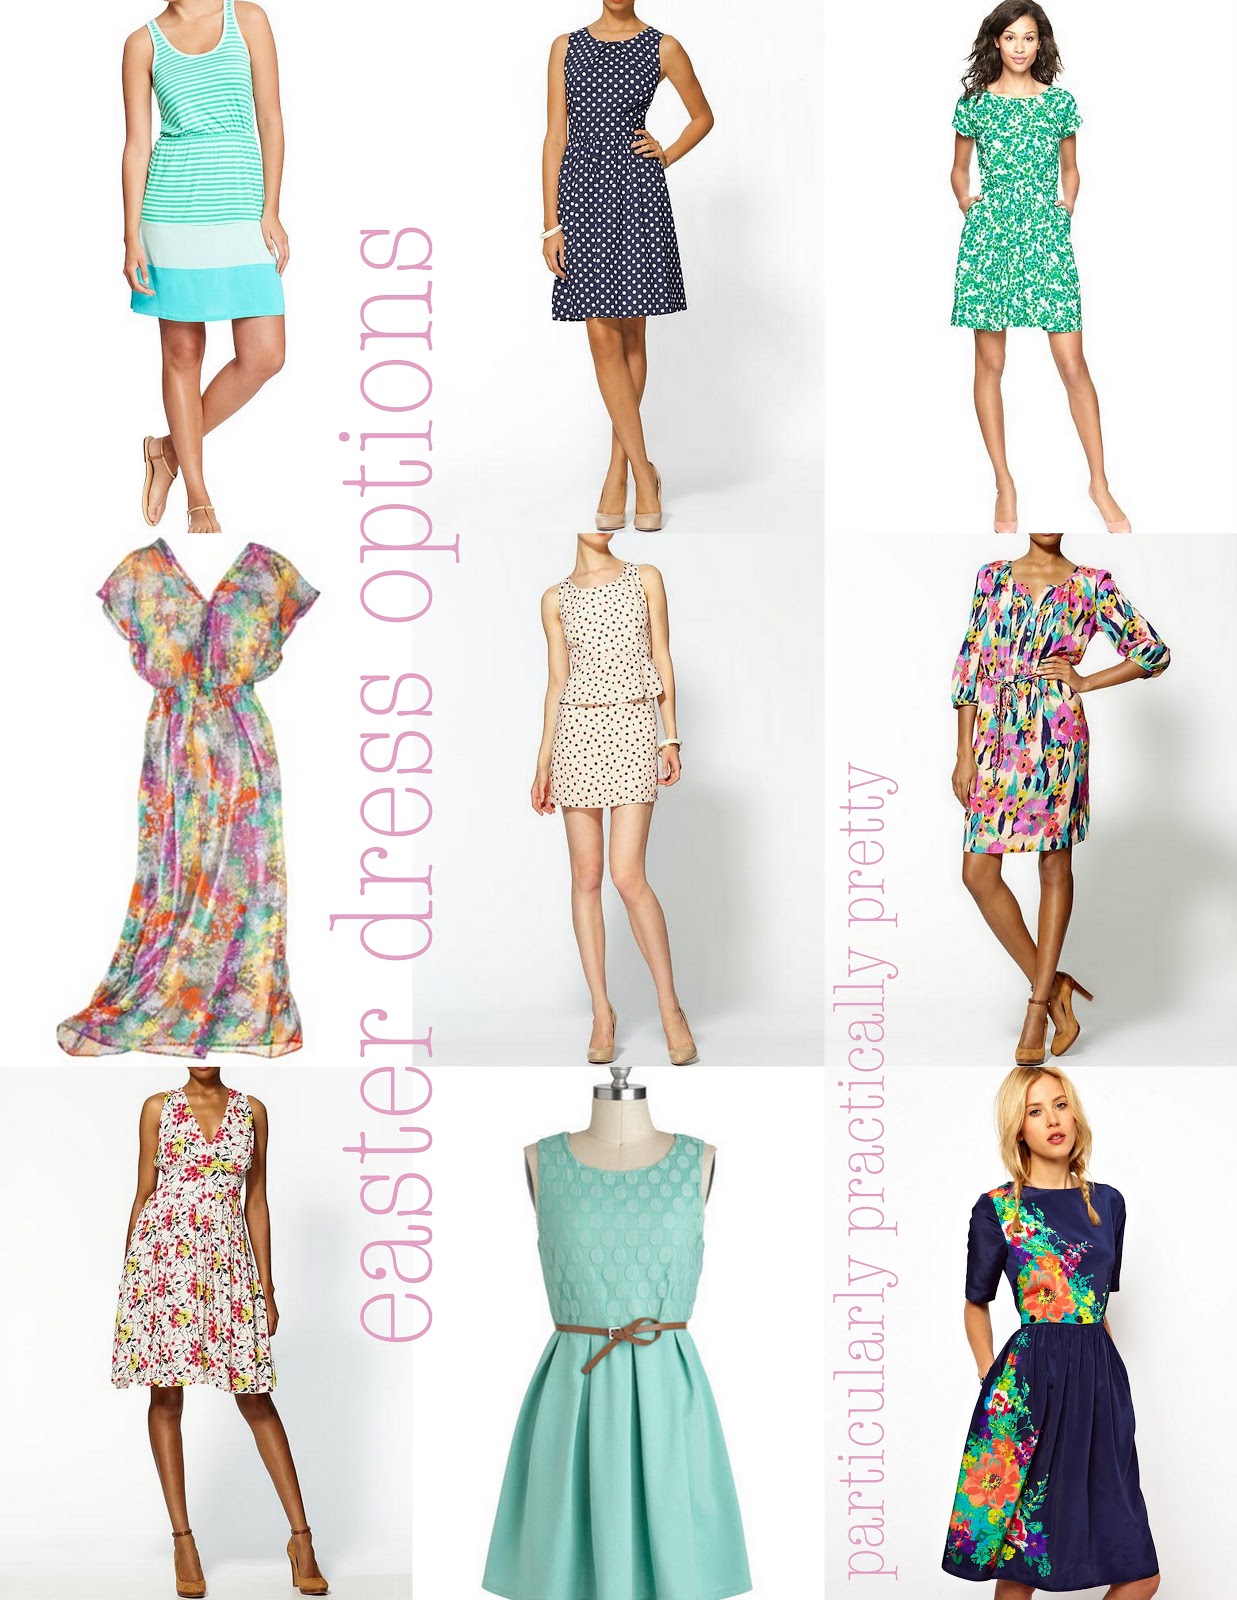 Particularly Practically Pretty: Obsessed: Easter dresses